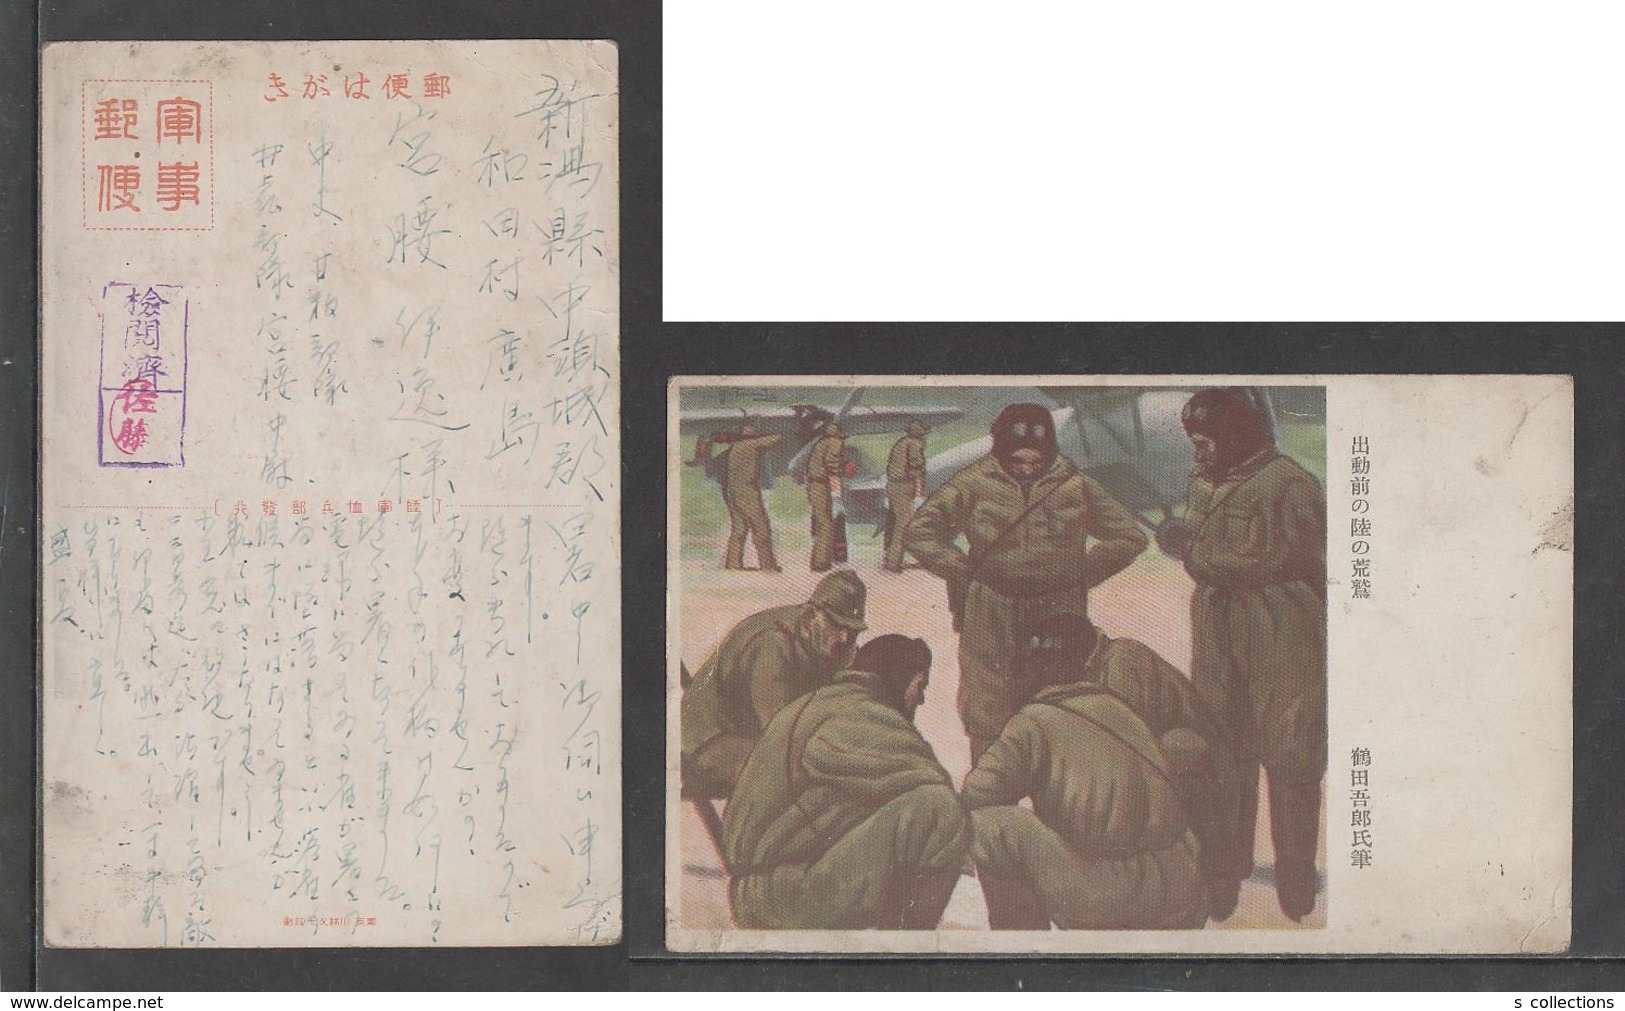 JAPAN WWII Military Japanese Pilot Picture Postcard CENTRAL CHINA WW2 MANCHURIA CHINE MANDCHOUKOUO JAPON GIAPPONE - 1943-45 Shanghái & Nankín